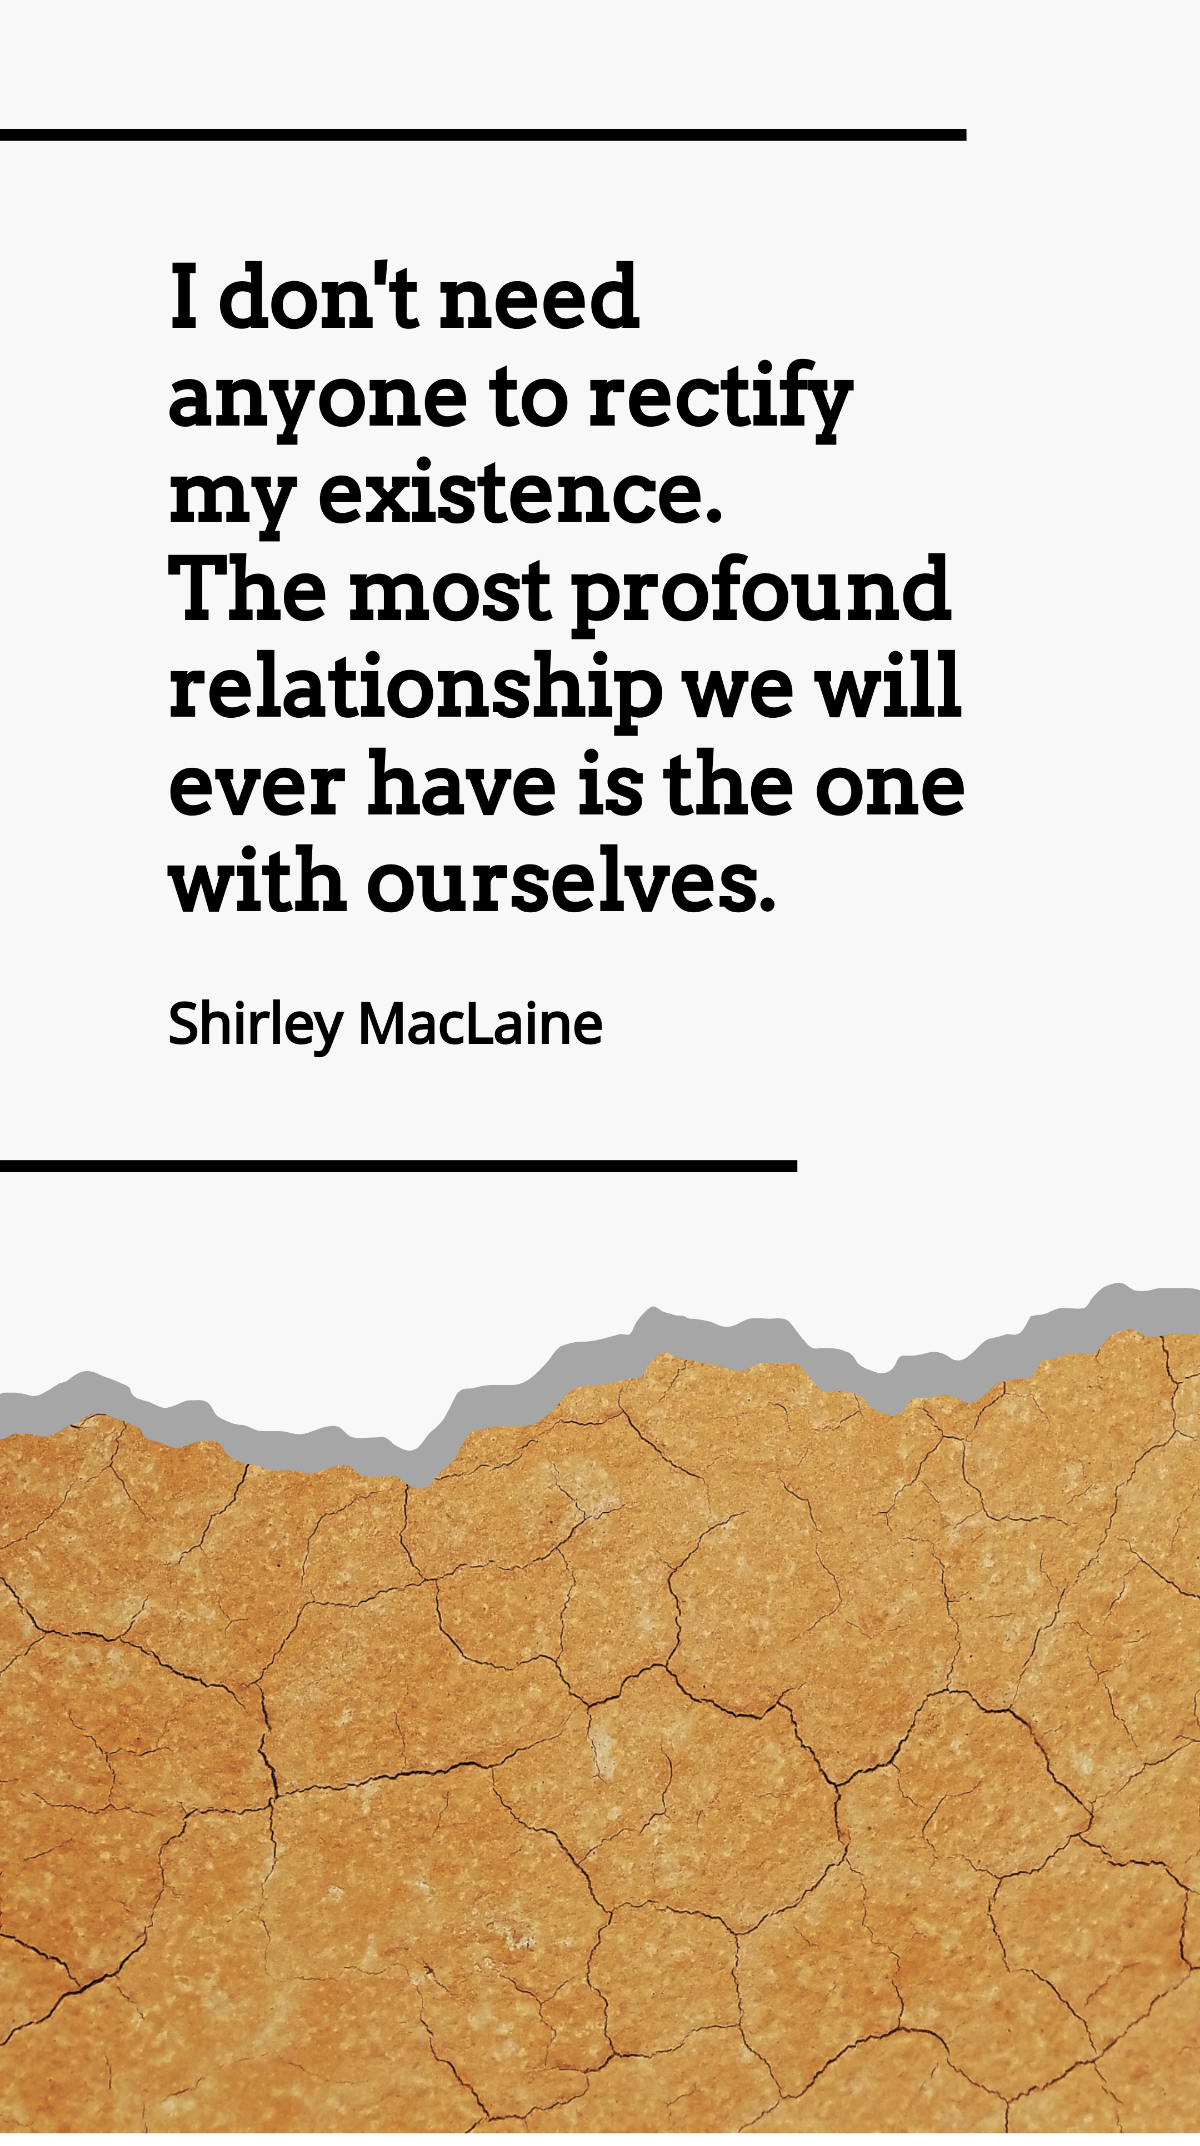 Shirley MacLaine - I don't need anyone to rectify my existence. The most profound relationship we will ever have is the one with ourselves. Template